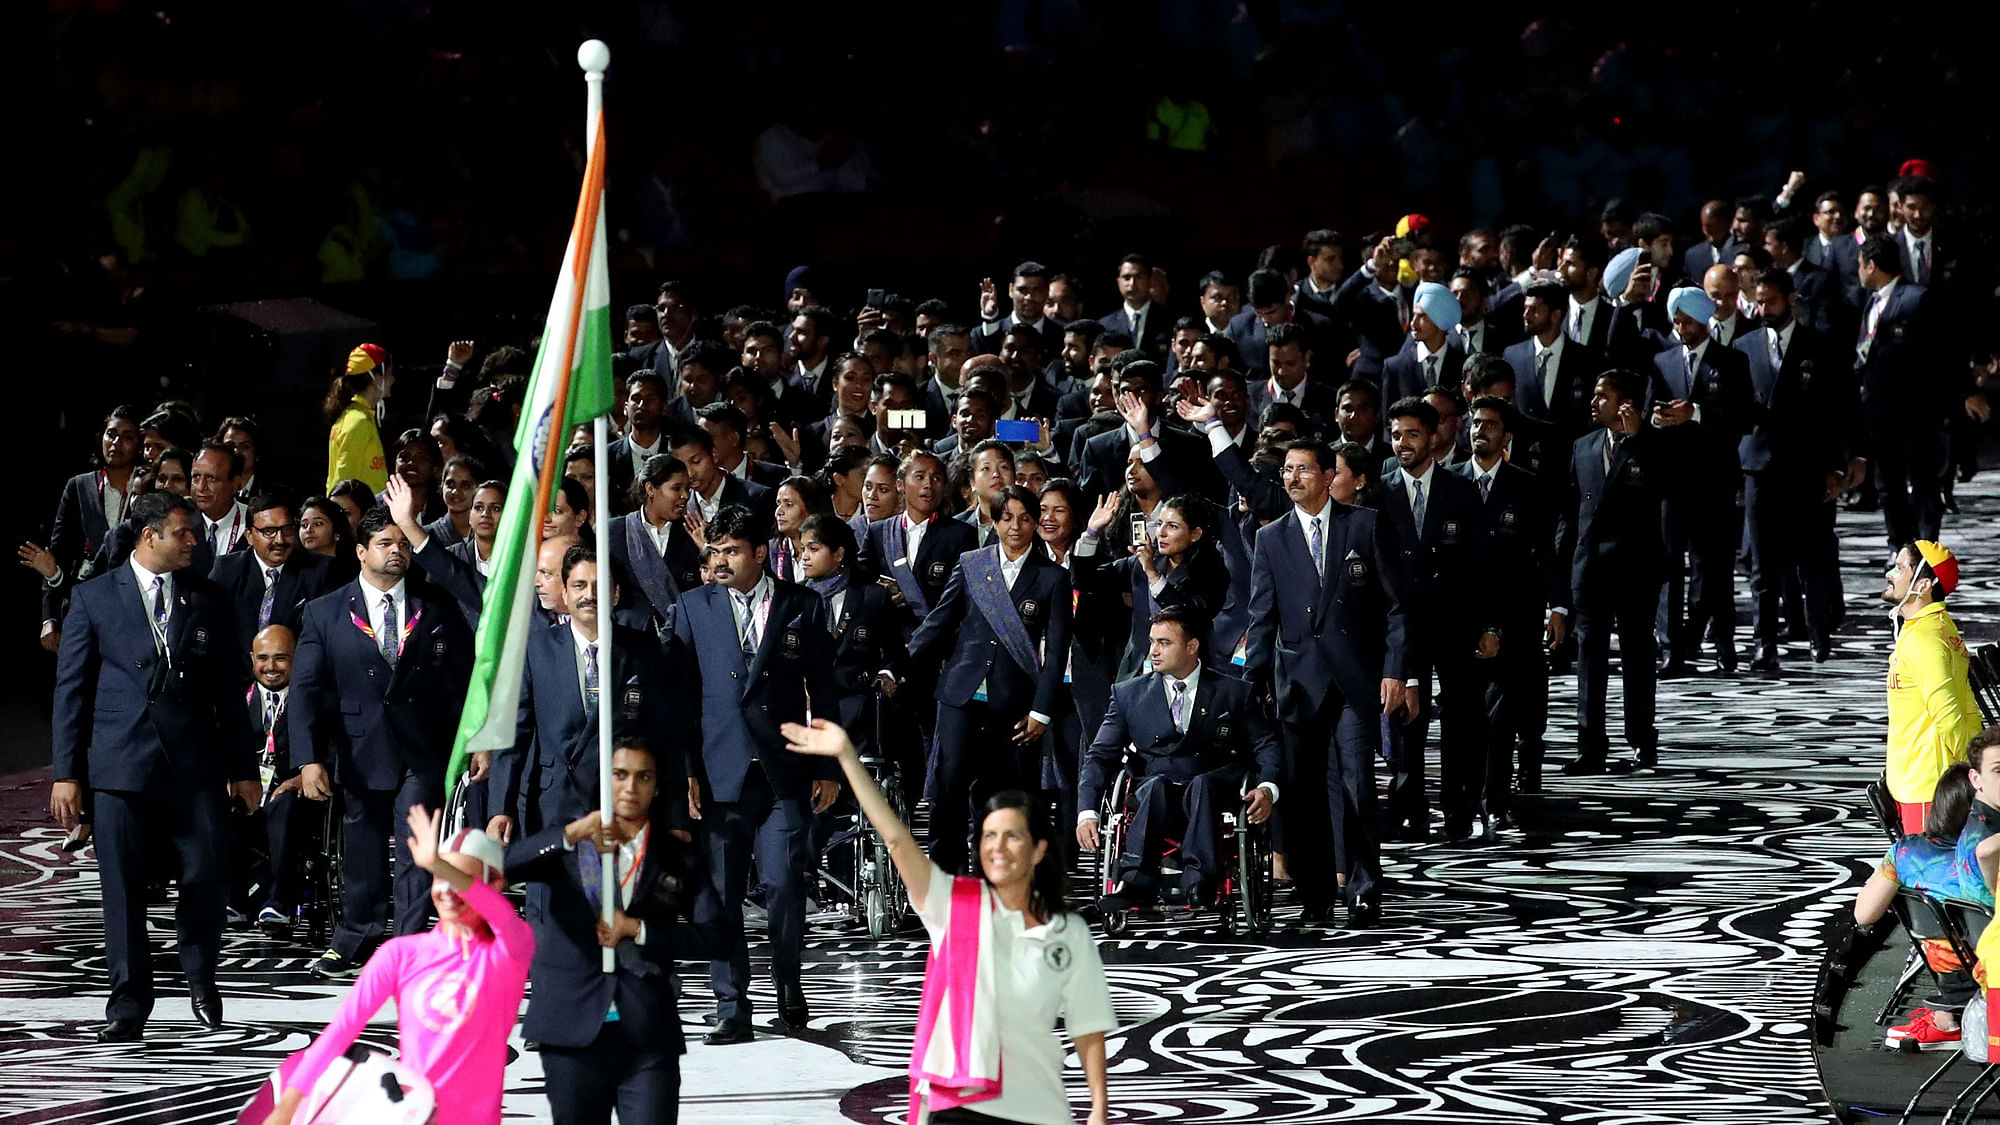 PV Sindhu leads India’s contingent for the CWG 2018 opening ceremony.